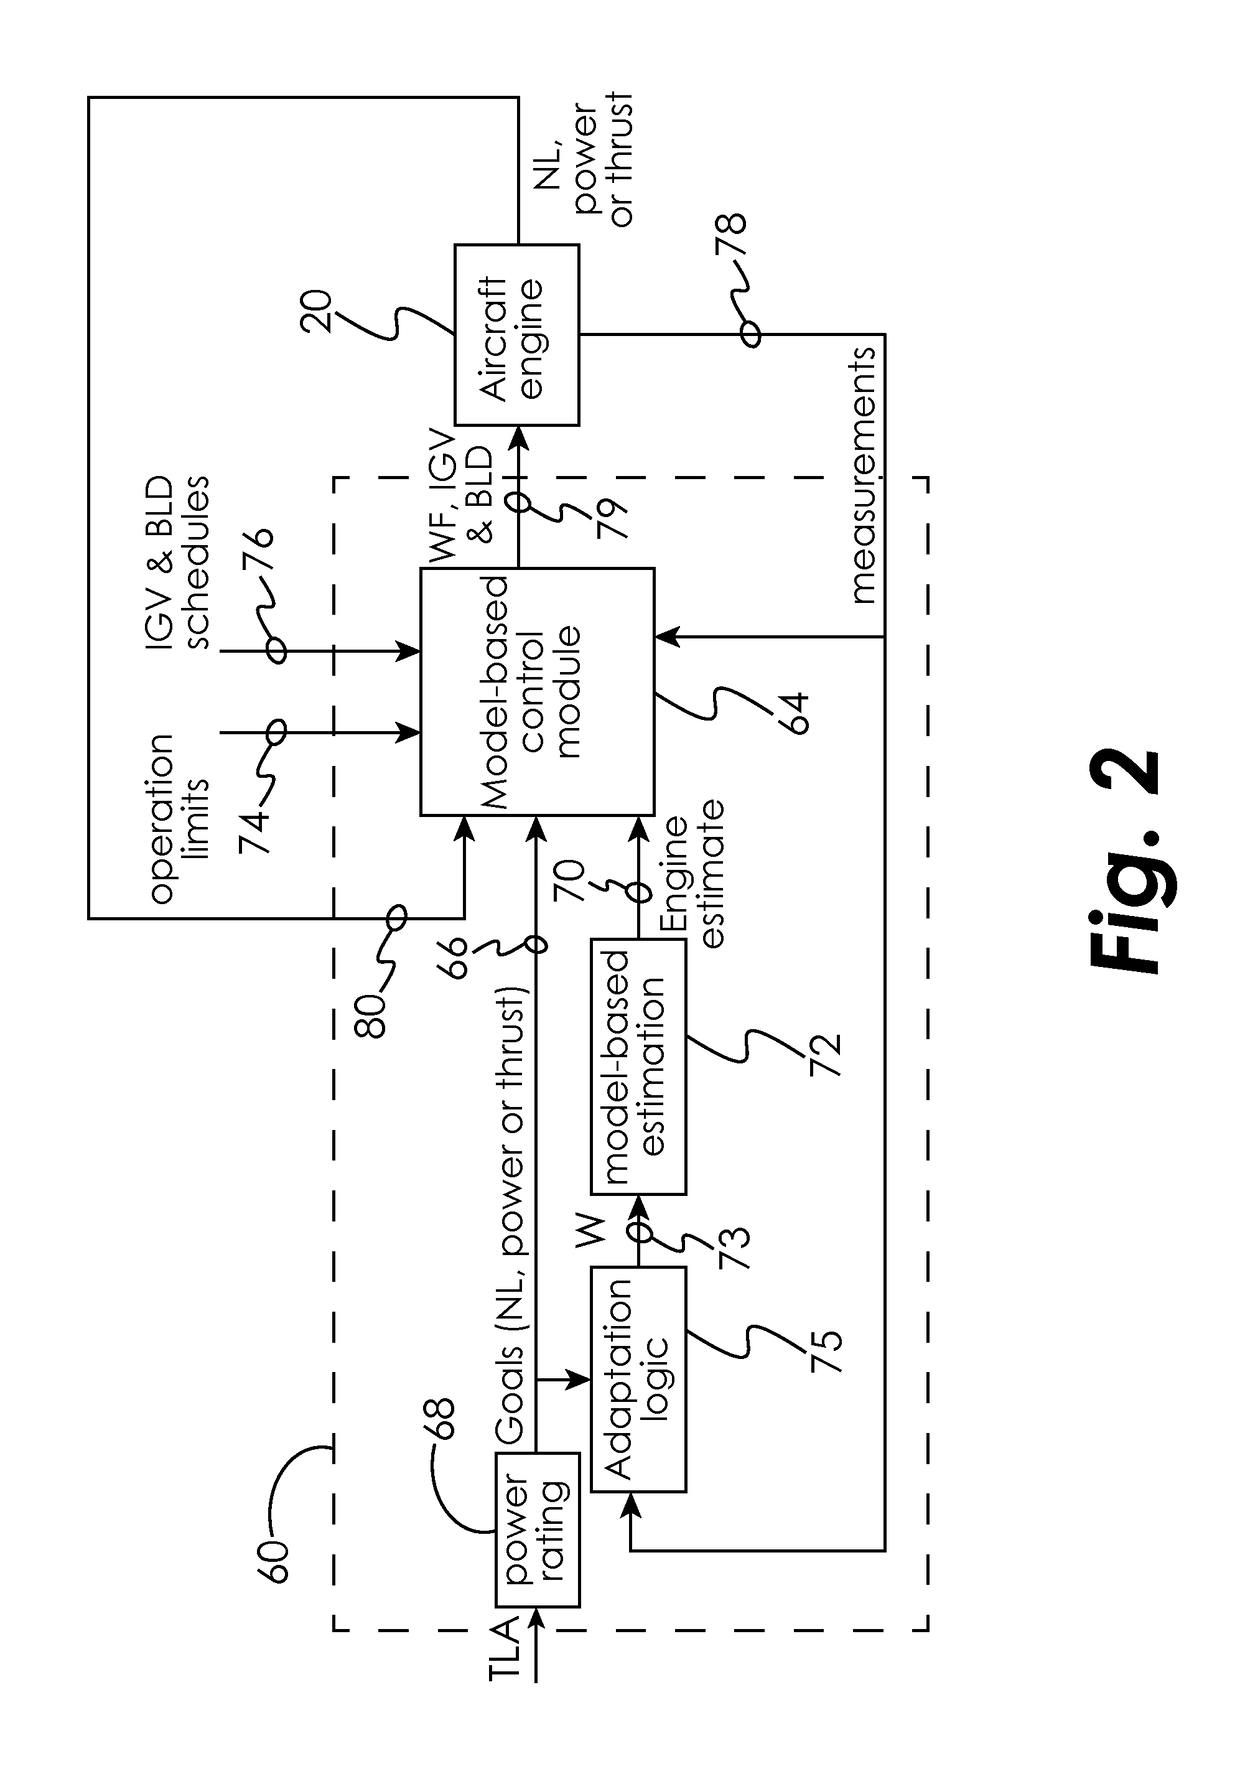 System and method for controlling a gas turbine engine